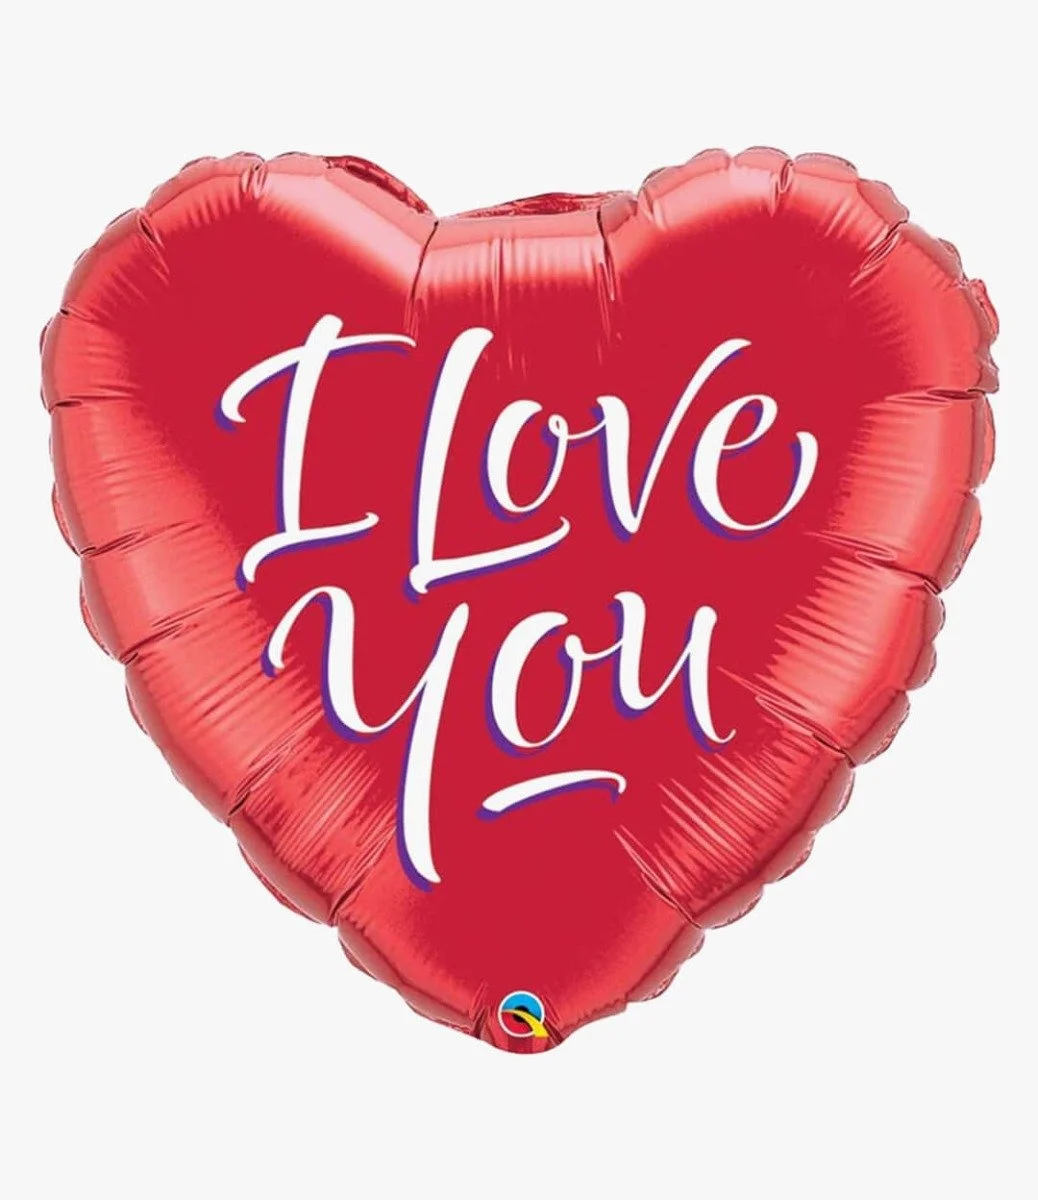 I love You Red Heart Helium Foil Balloon